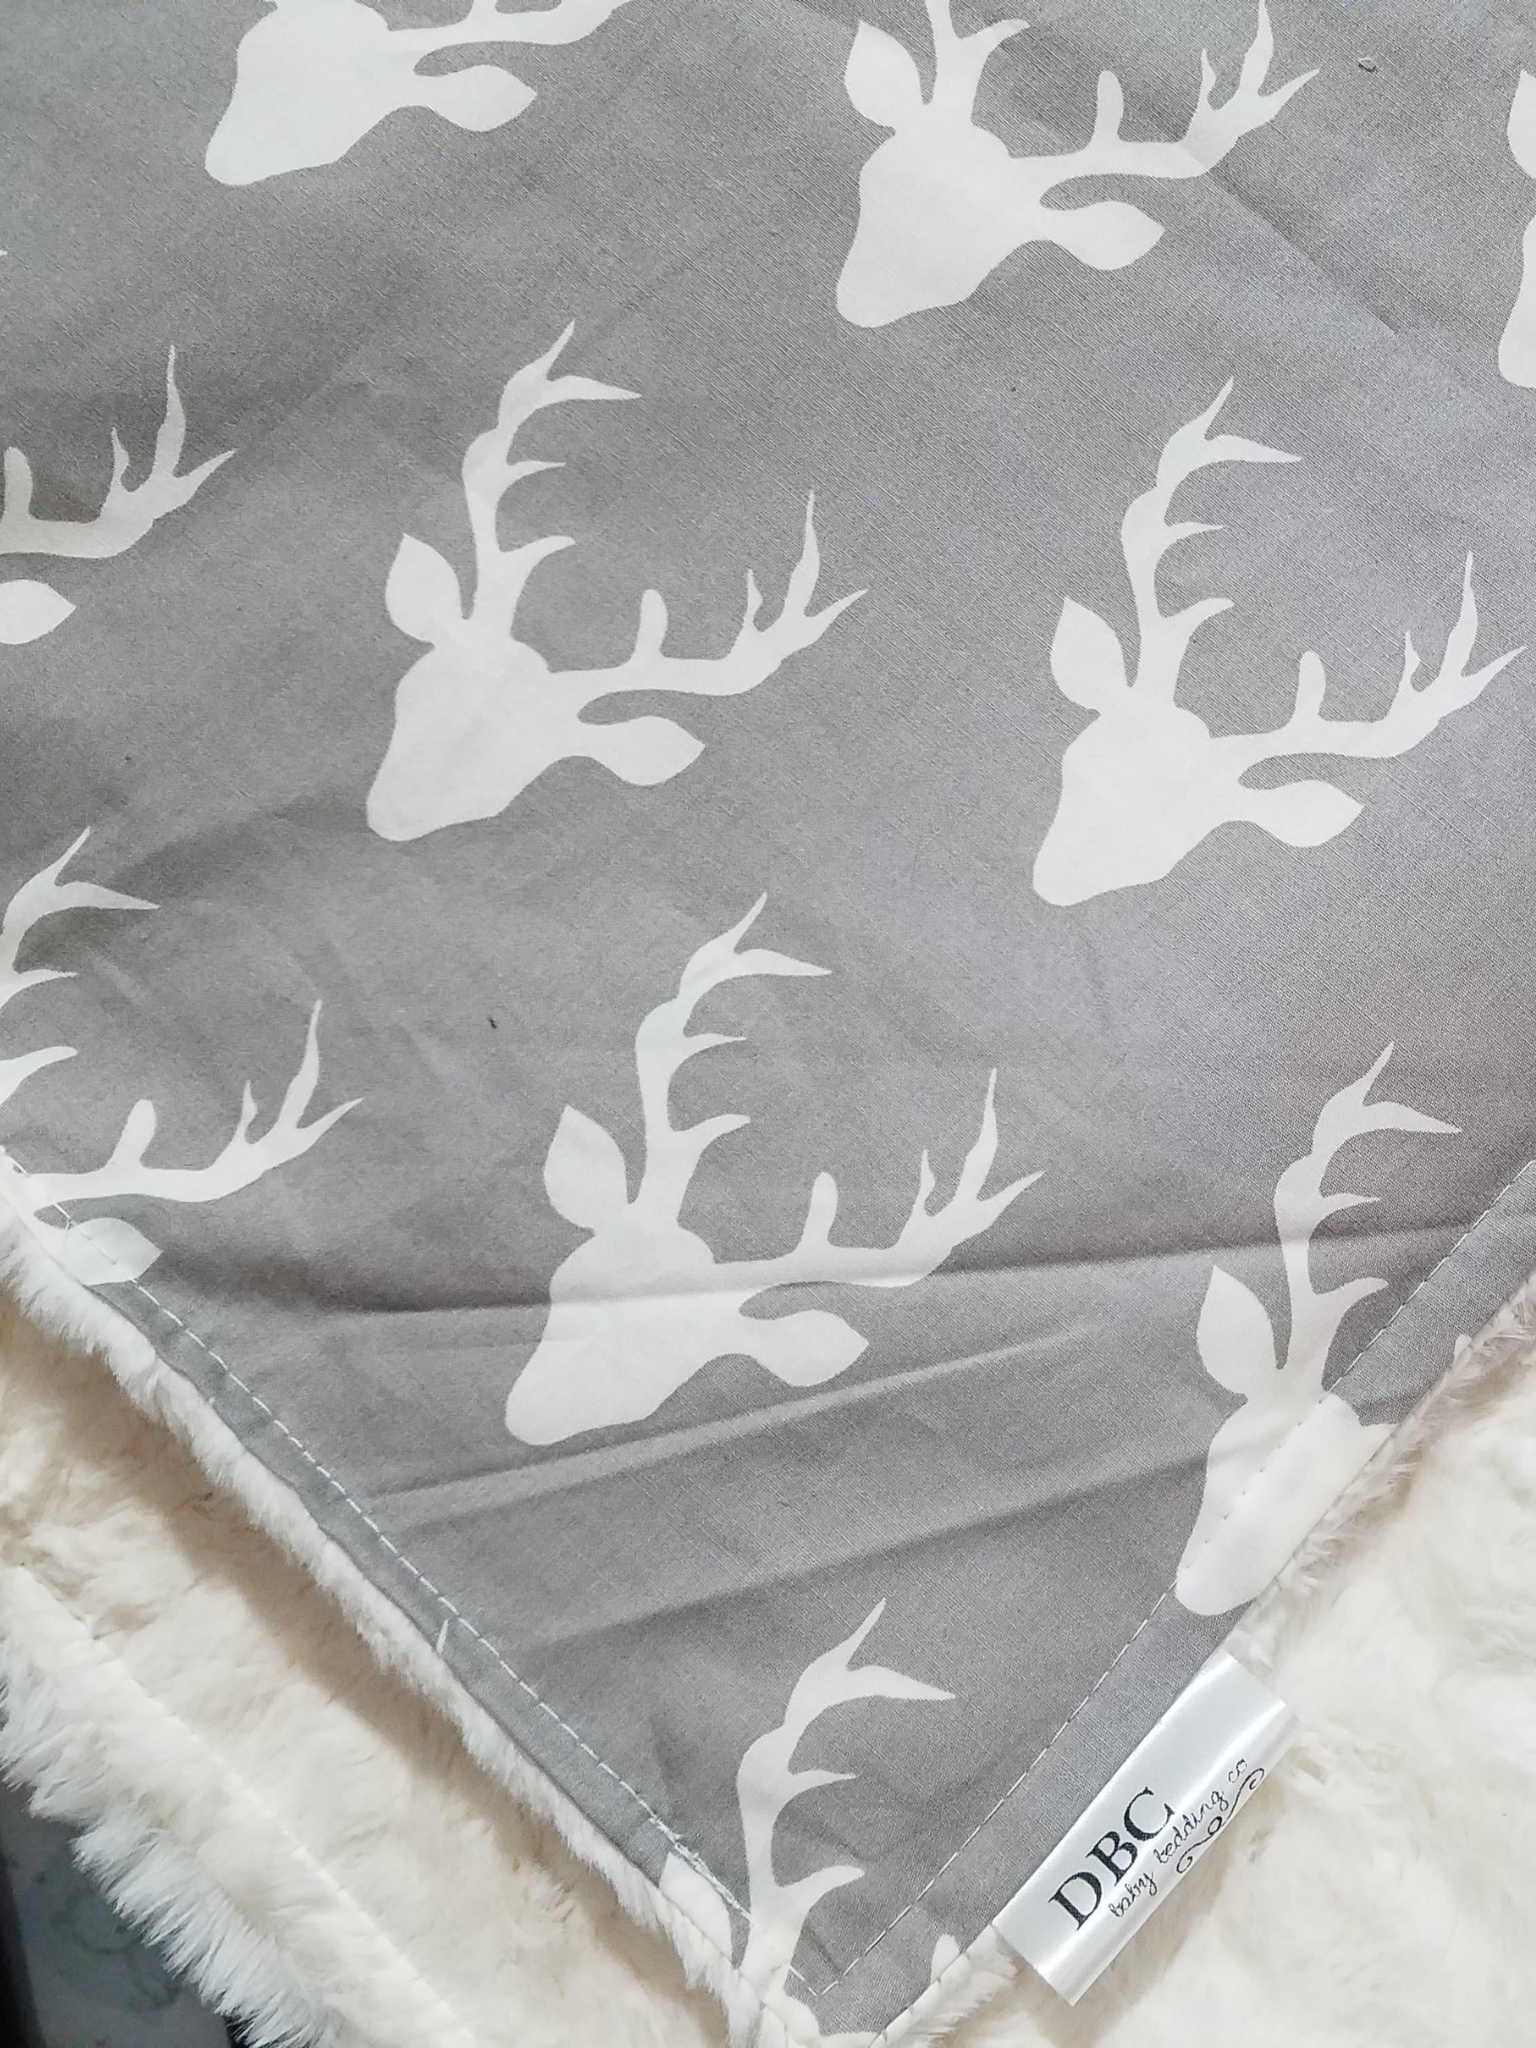 Standard Blanket - Light Gray Buck and Ivory Crushed Minky Blanket - DBC Baby Bedding Co 